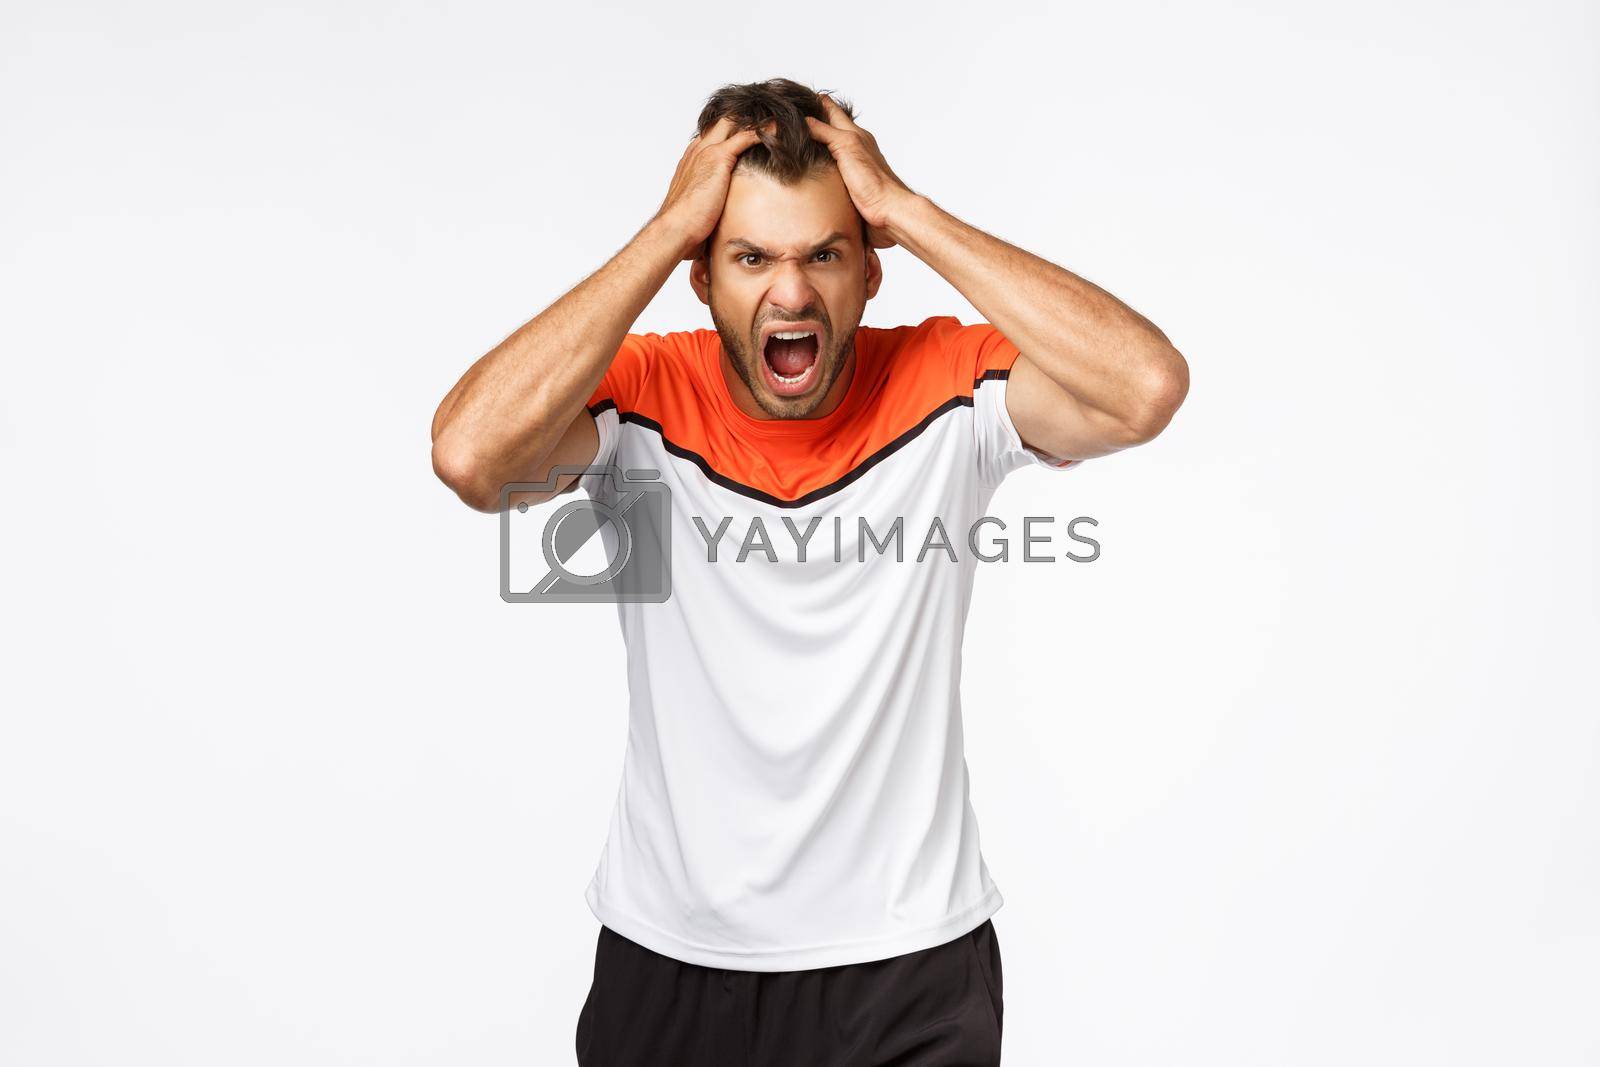 Royalty free image of Angry, aggressive mascular sportsman looking furious, grab head in rage and fury, shouting and grimacing from anger and disappointment. Athlete lost match, team scored goal, white background by Benzoix